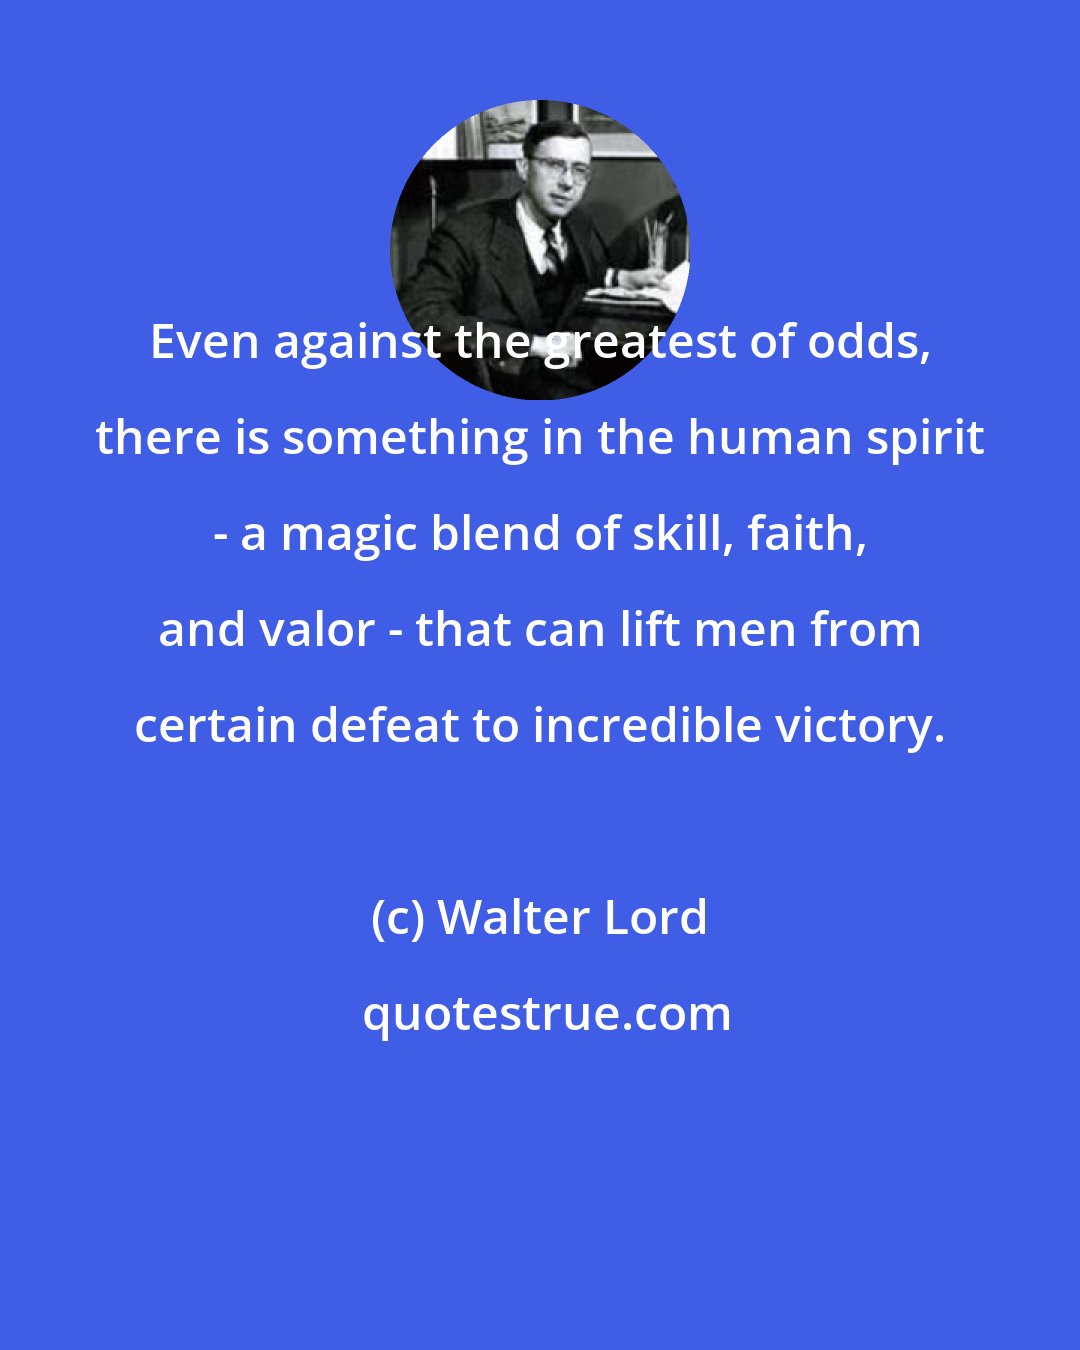 Walter Lord: Even against the greatest of odds, there is something in the human spirit - a magic blend of skill, faith, and valor - that can lift men from certain defeat to incredible victory.